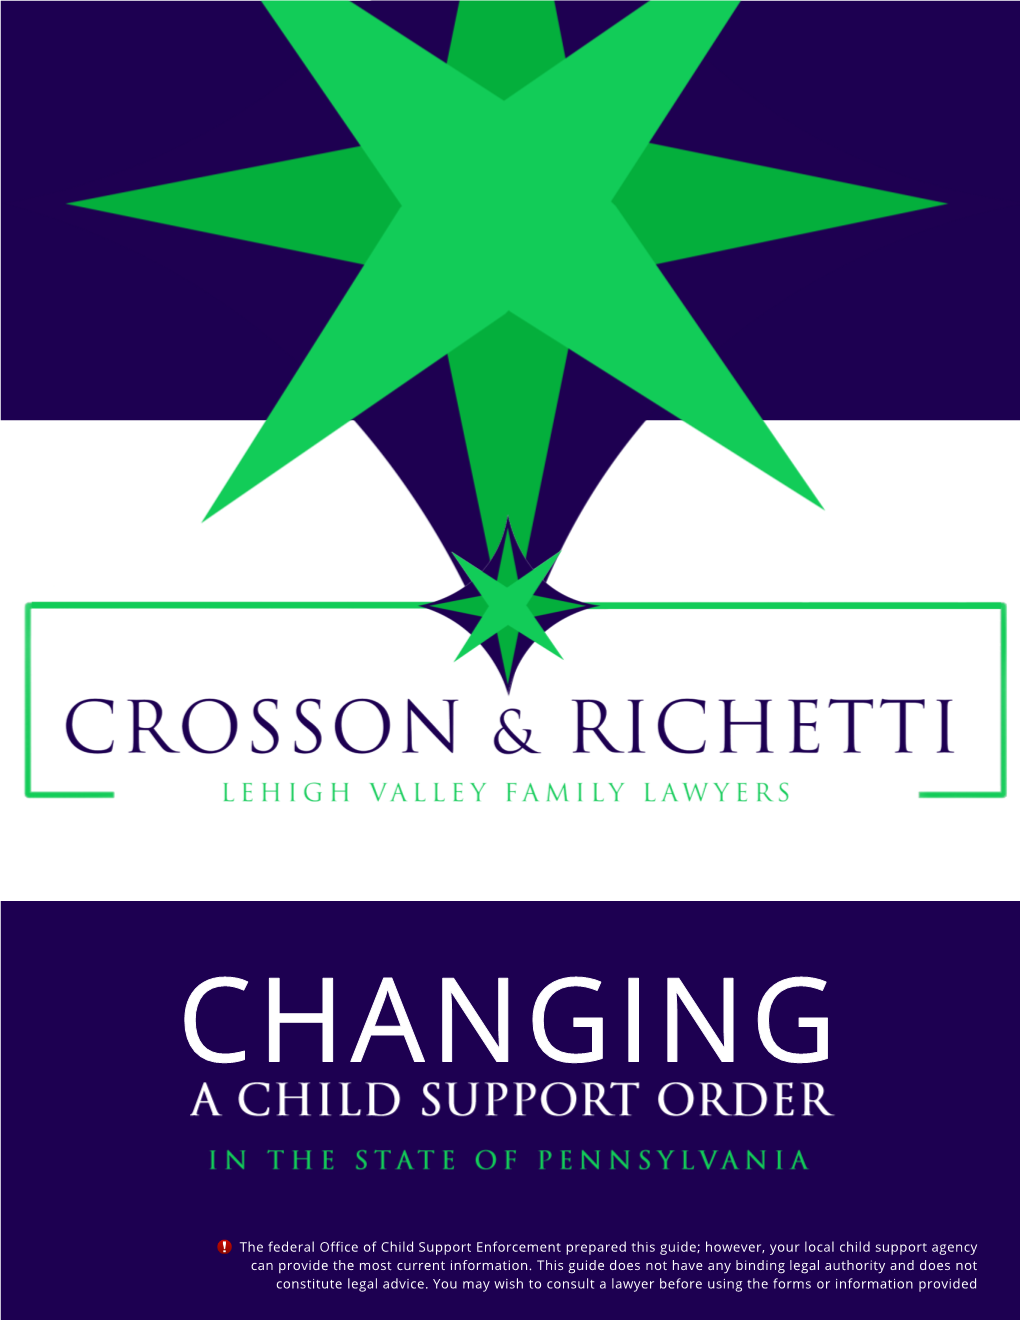 The Federal Office of Child Support Enforcement Prepared This Guide; However, Your Local Child Support Agency Can Provide the Most Current Information